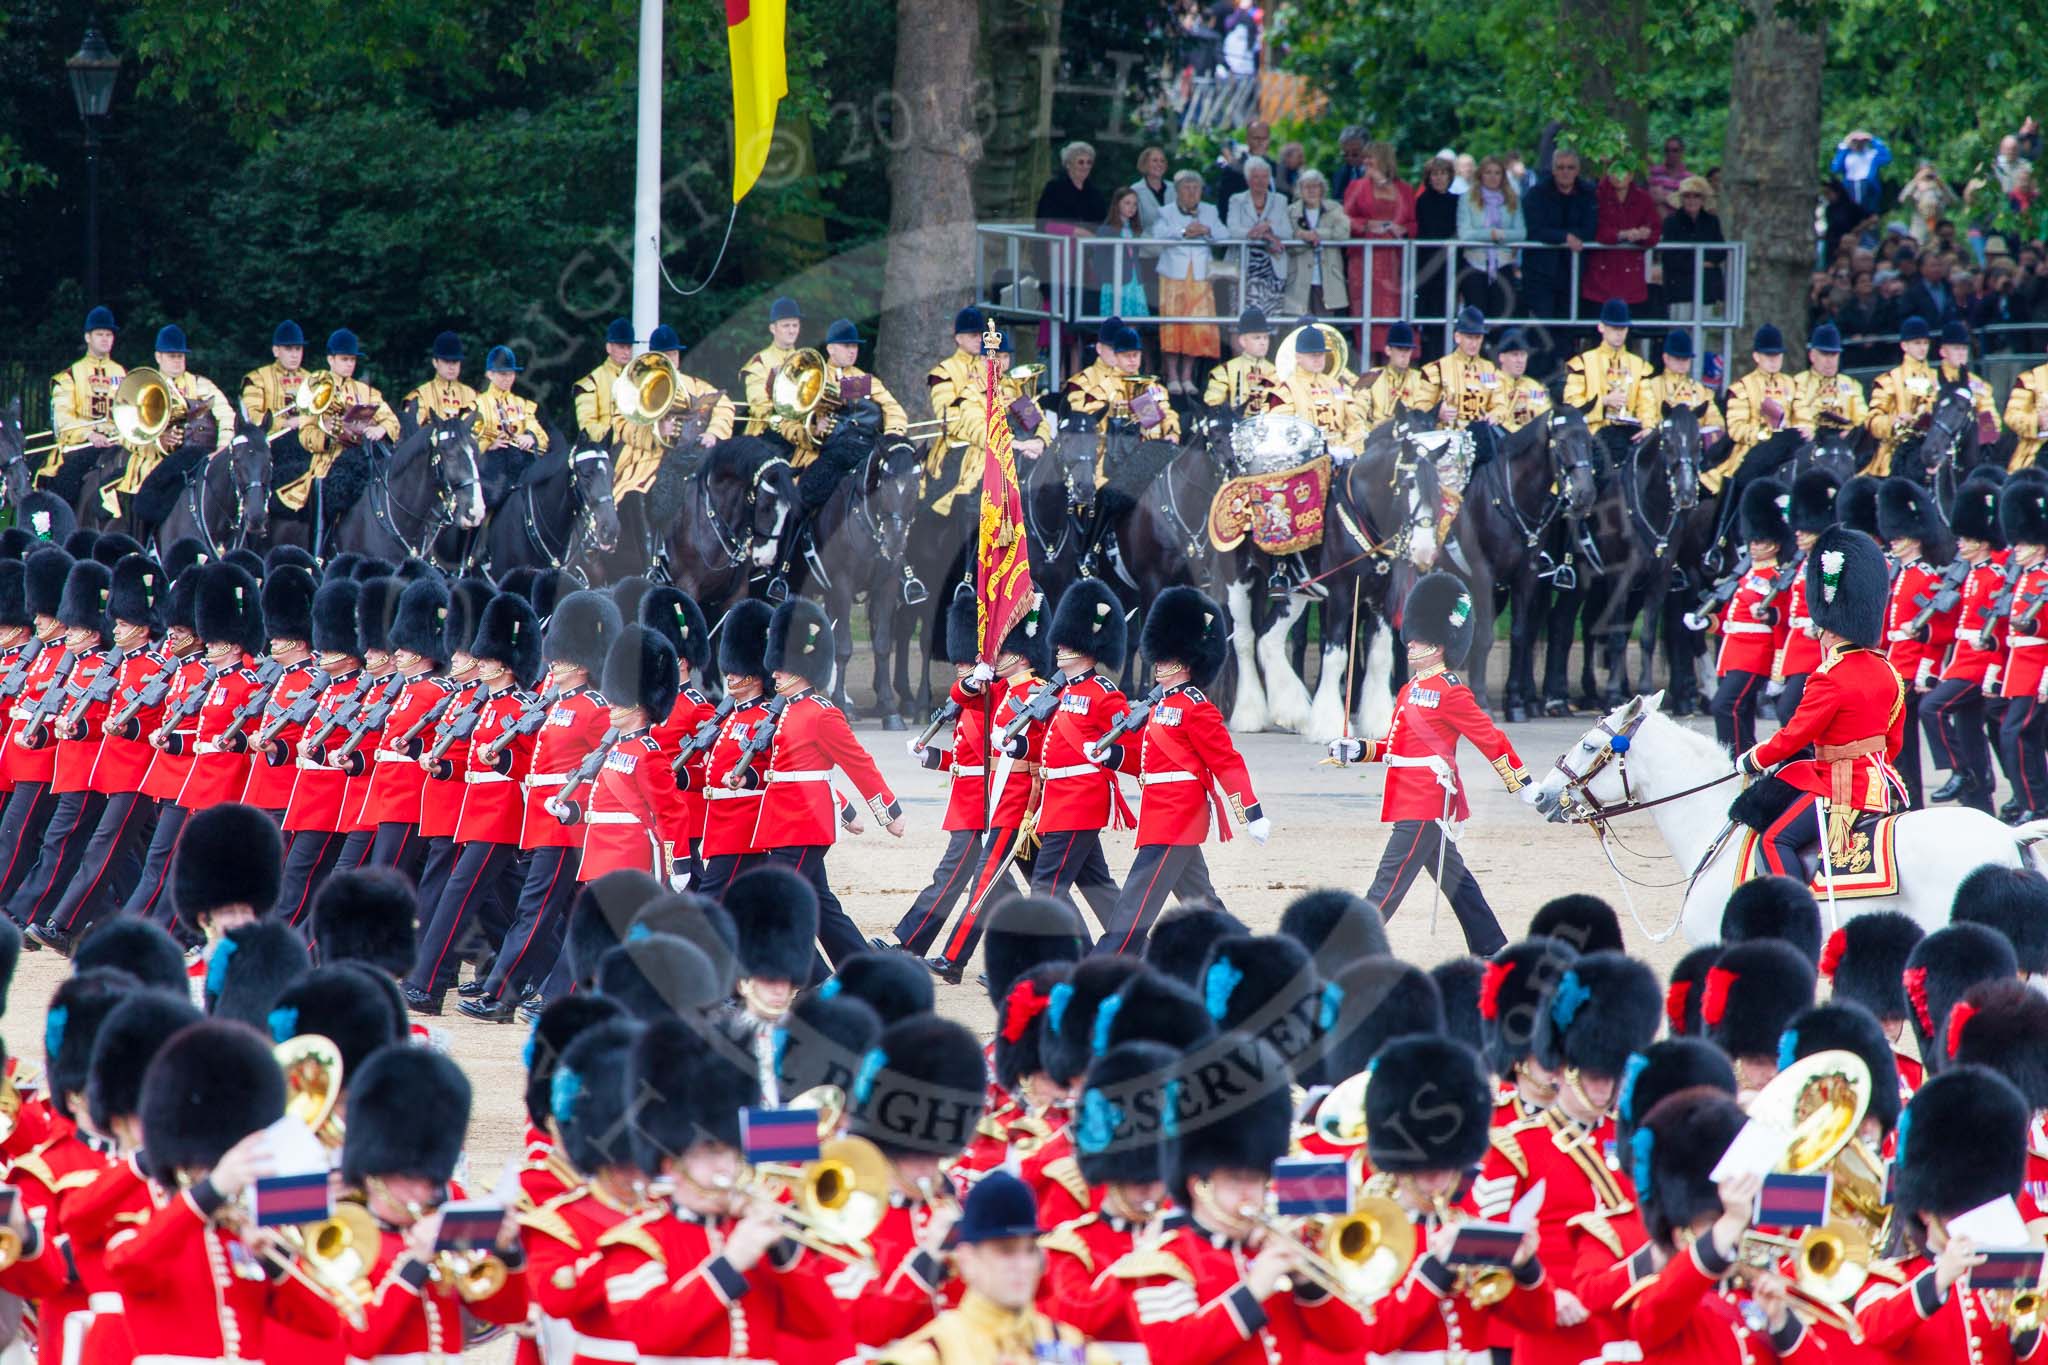 Trooping the Colour 2013: No. 1 Guard (Escort for the Colour),1st Battalion Welsh Guards, at the beginning of the March Past in Quick Time. Behind them the Mounted Bands of the Household Cavalry. The Field Officer appears from the right to return to the head of the march past. Image #577, 15 June 2013 11:42 Horse Guards Parade, London, UK